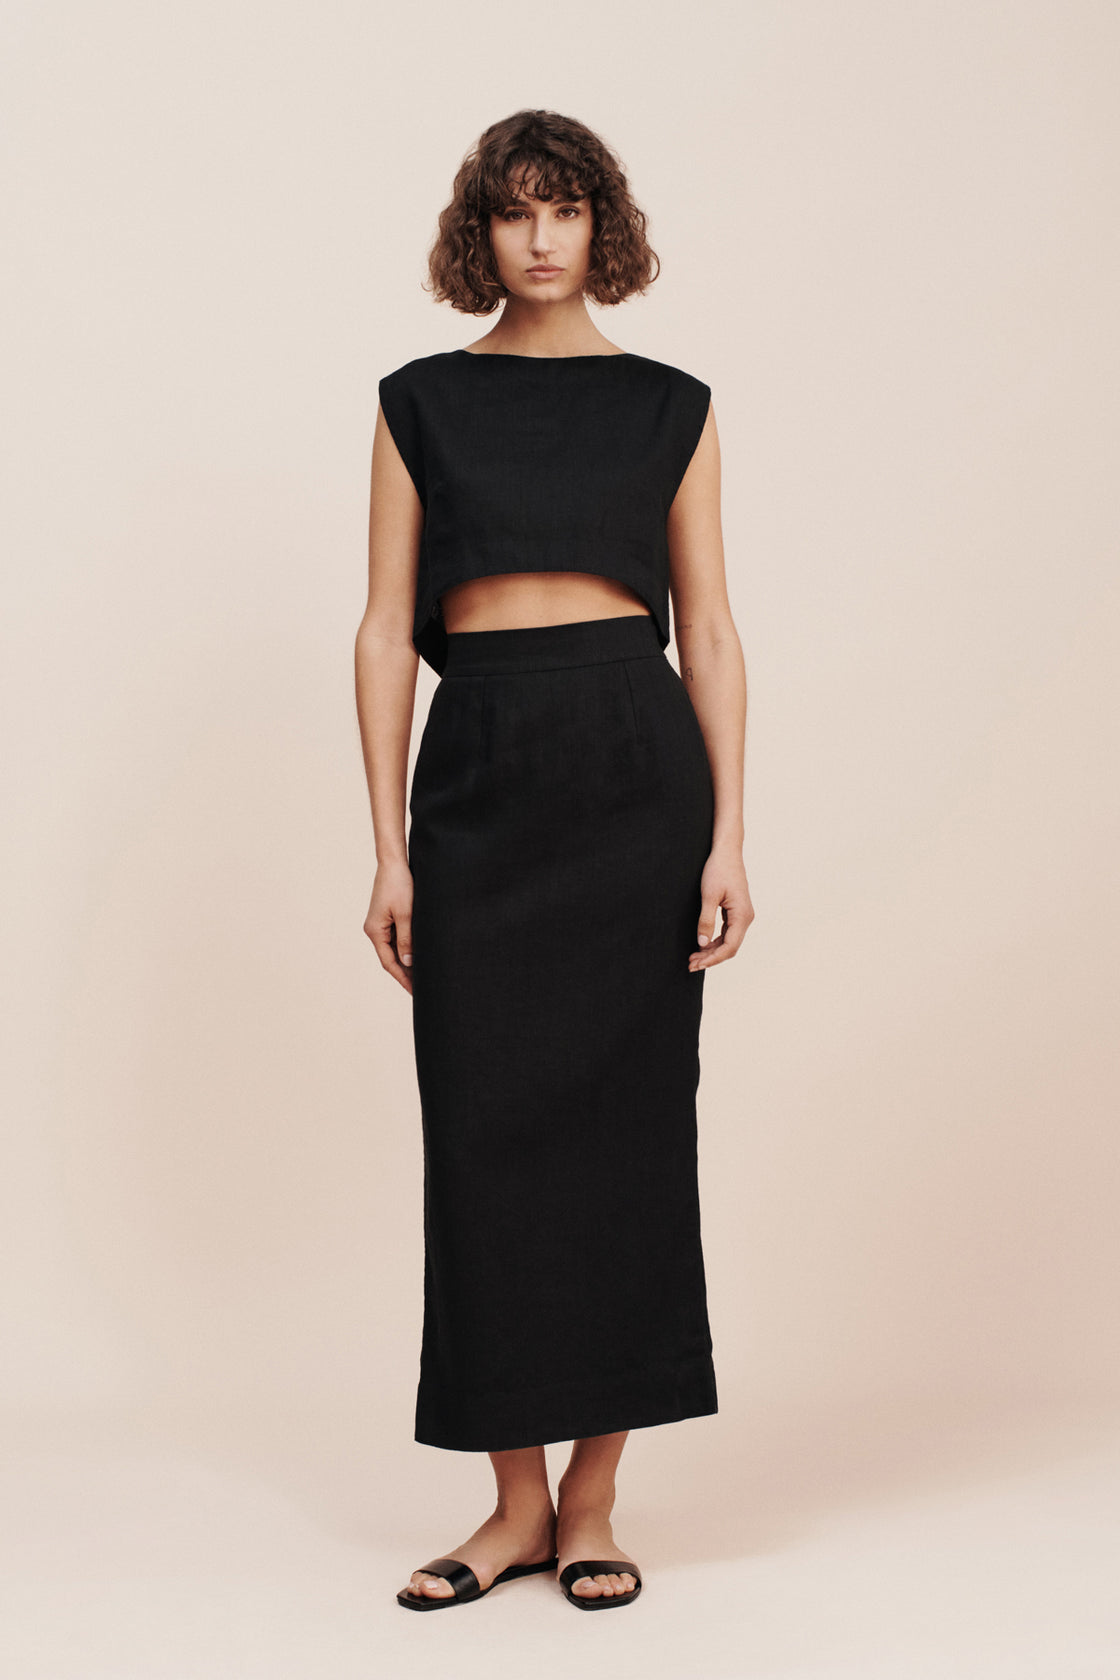 Posse Emma Pencil Skirt in Black available at TNT The New Trend Australia 